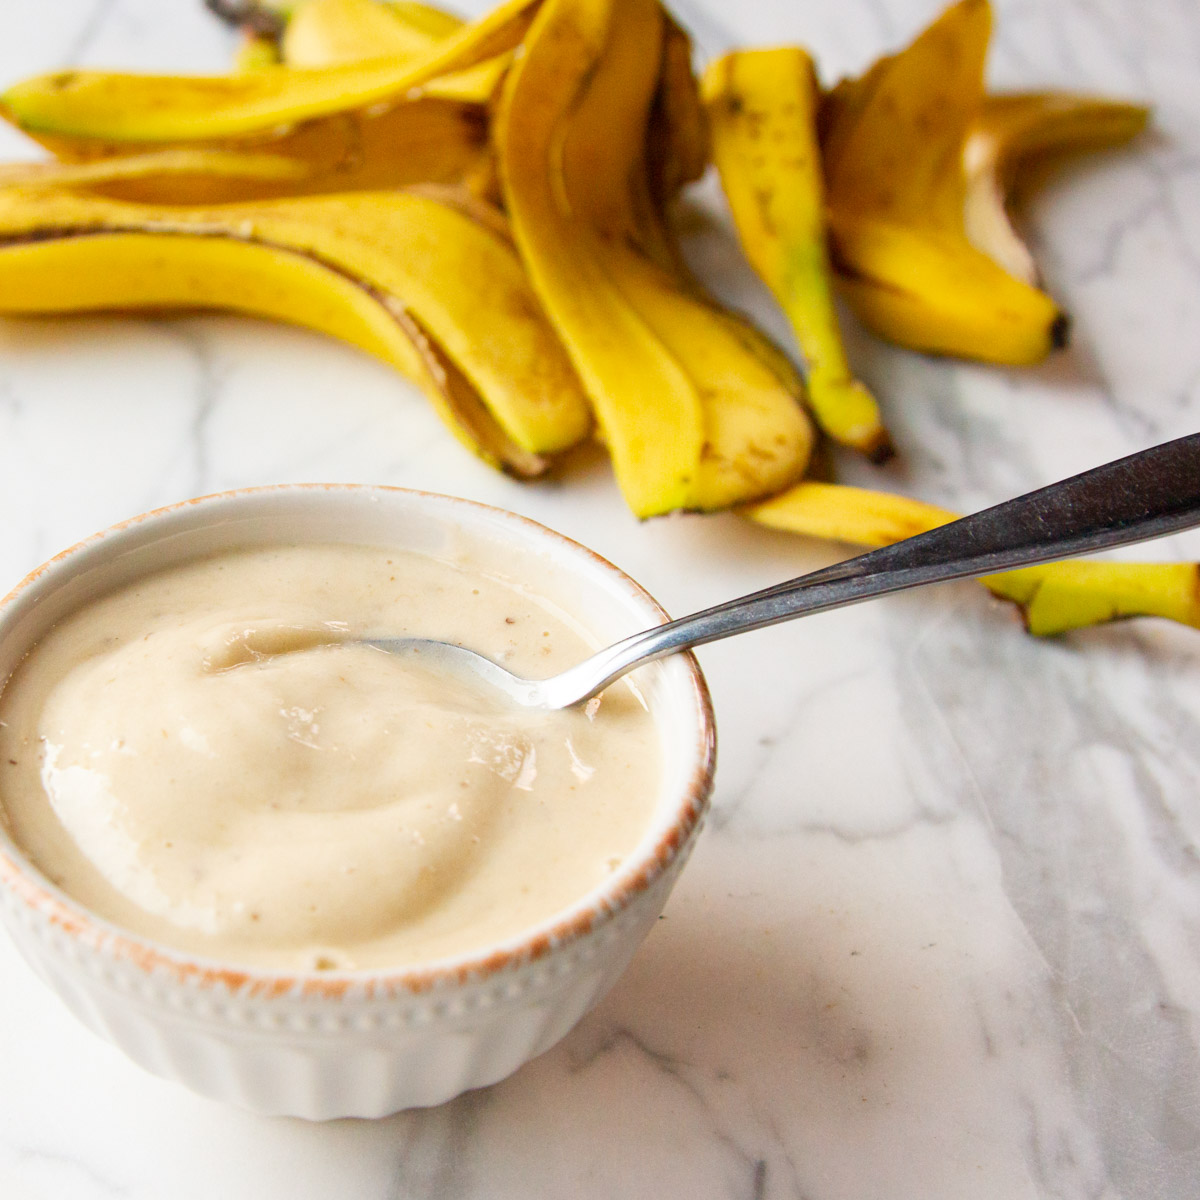 Craving Something Sweet and Creamy? How About Vegan Banana Ice Cream ...